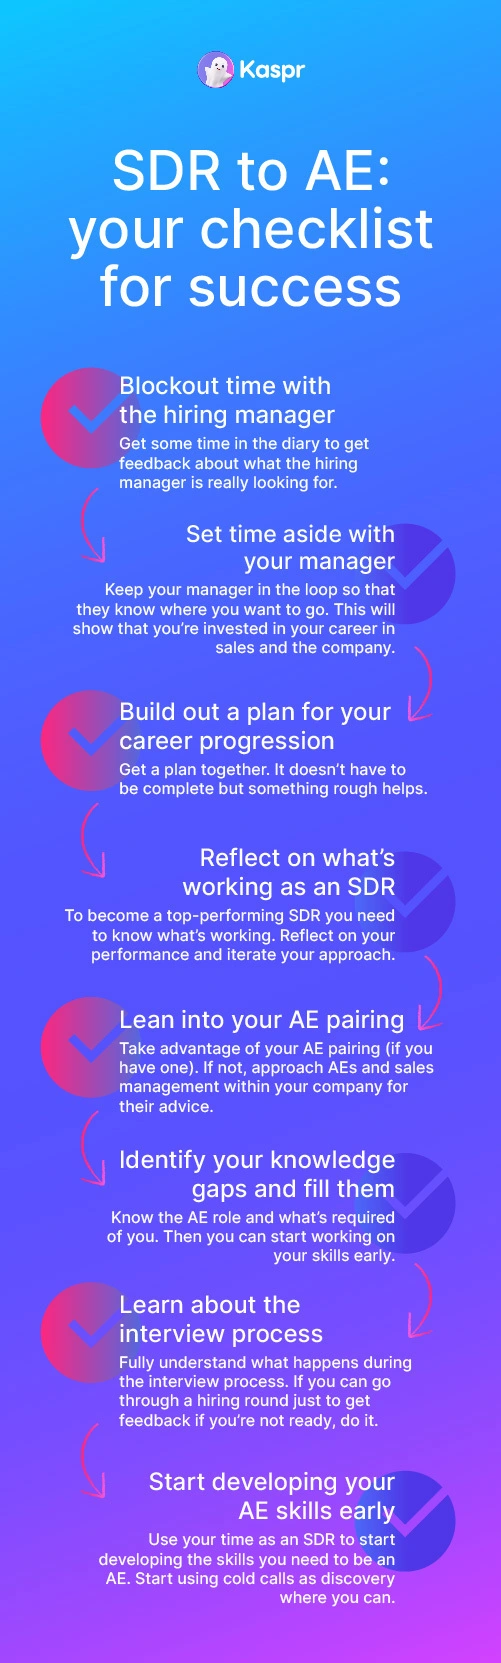 Infographic of checklist for SDR to AE career progression